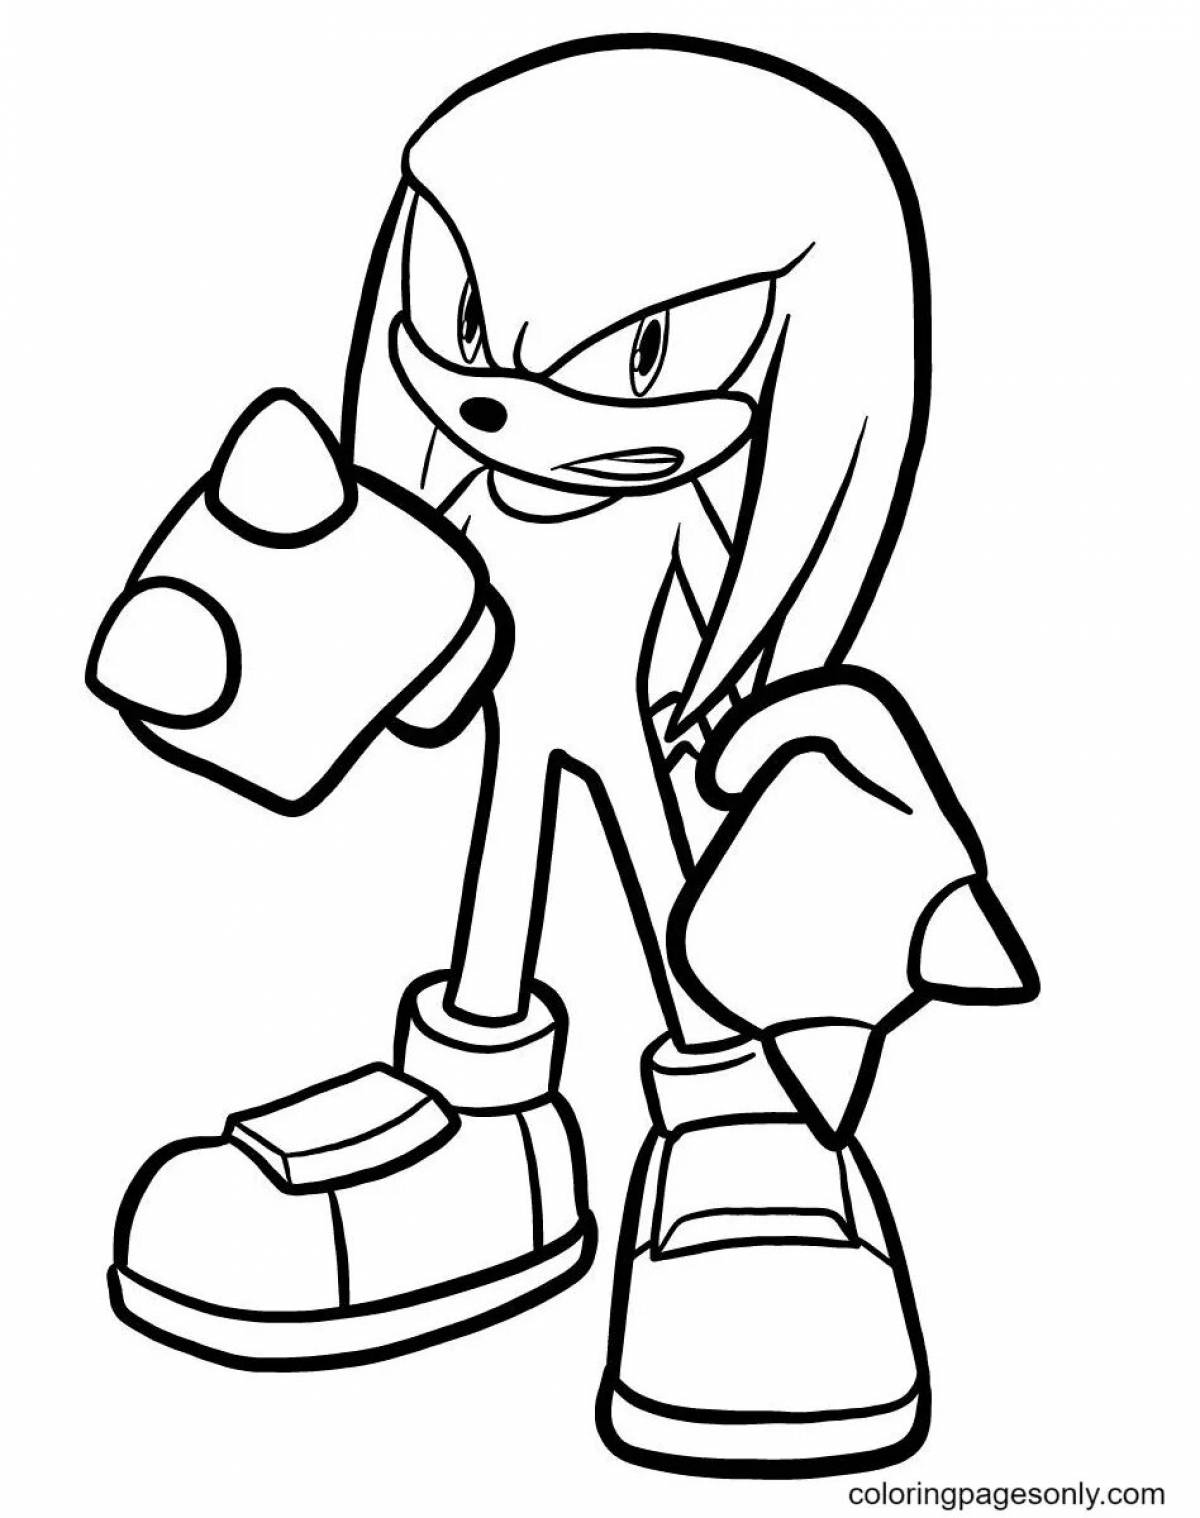 Knuckles the echidna coloring